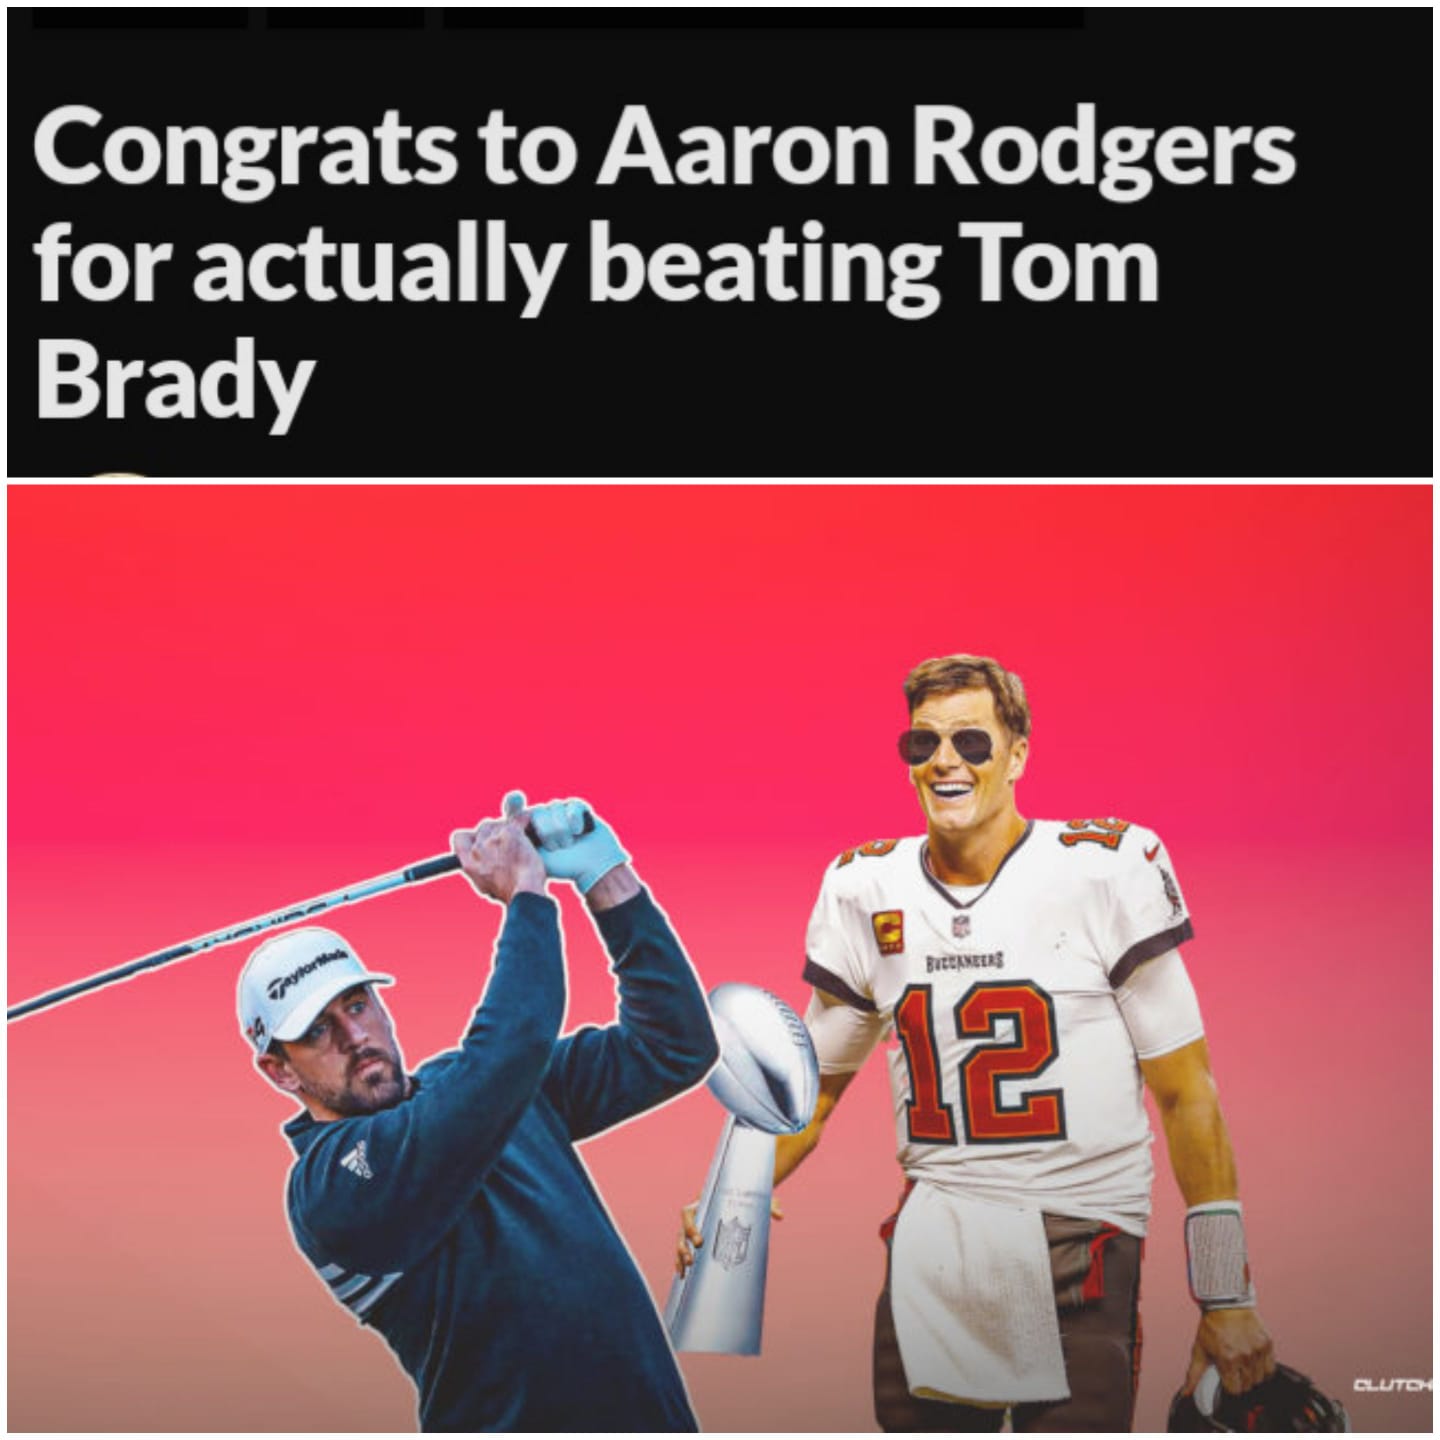 Congrats to Aaron Rodgers for actually beating Tom Brady